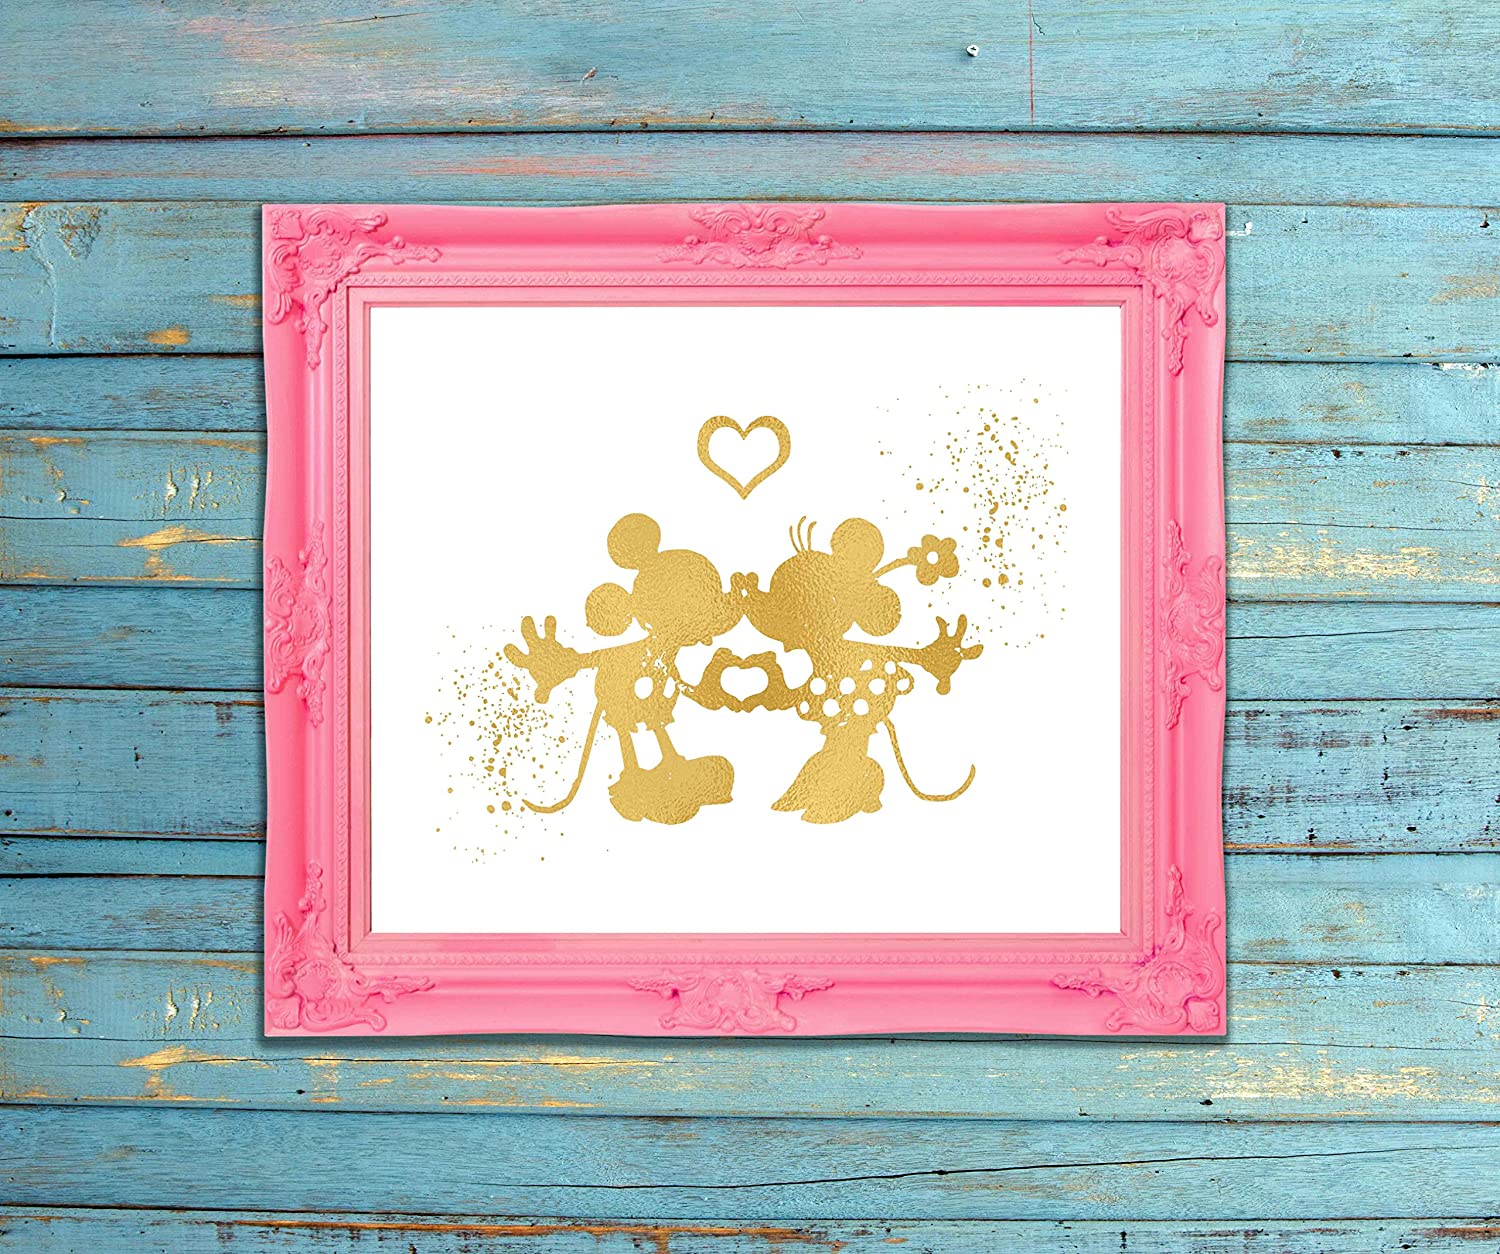 Art print Mickey Endless Love with / without frame by Disney